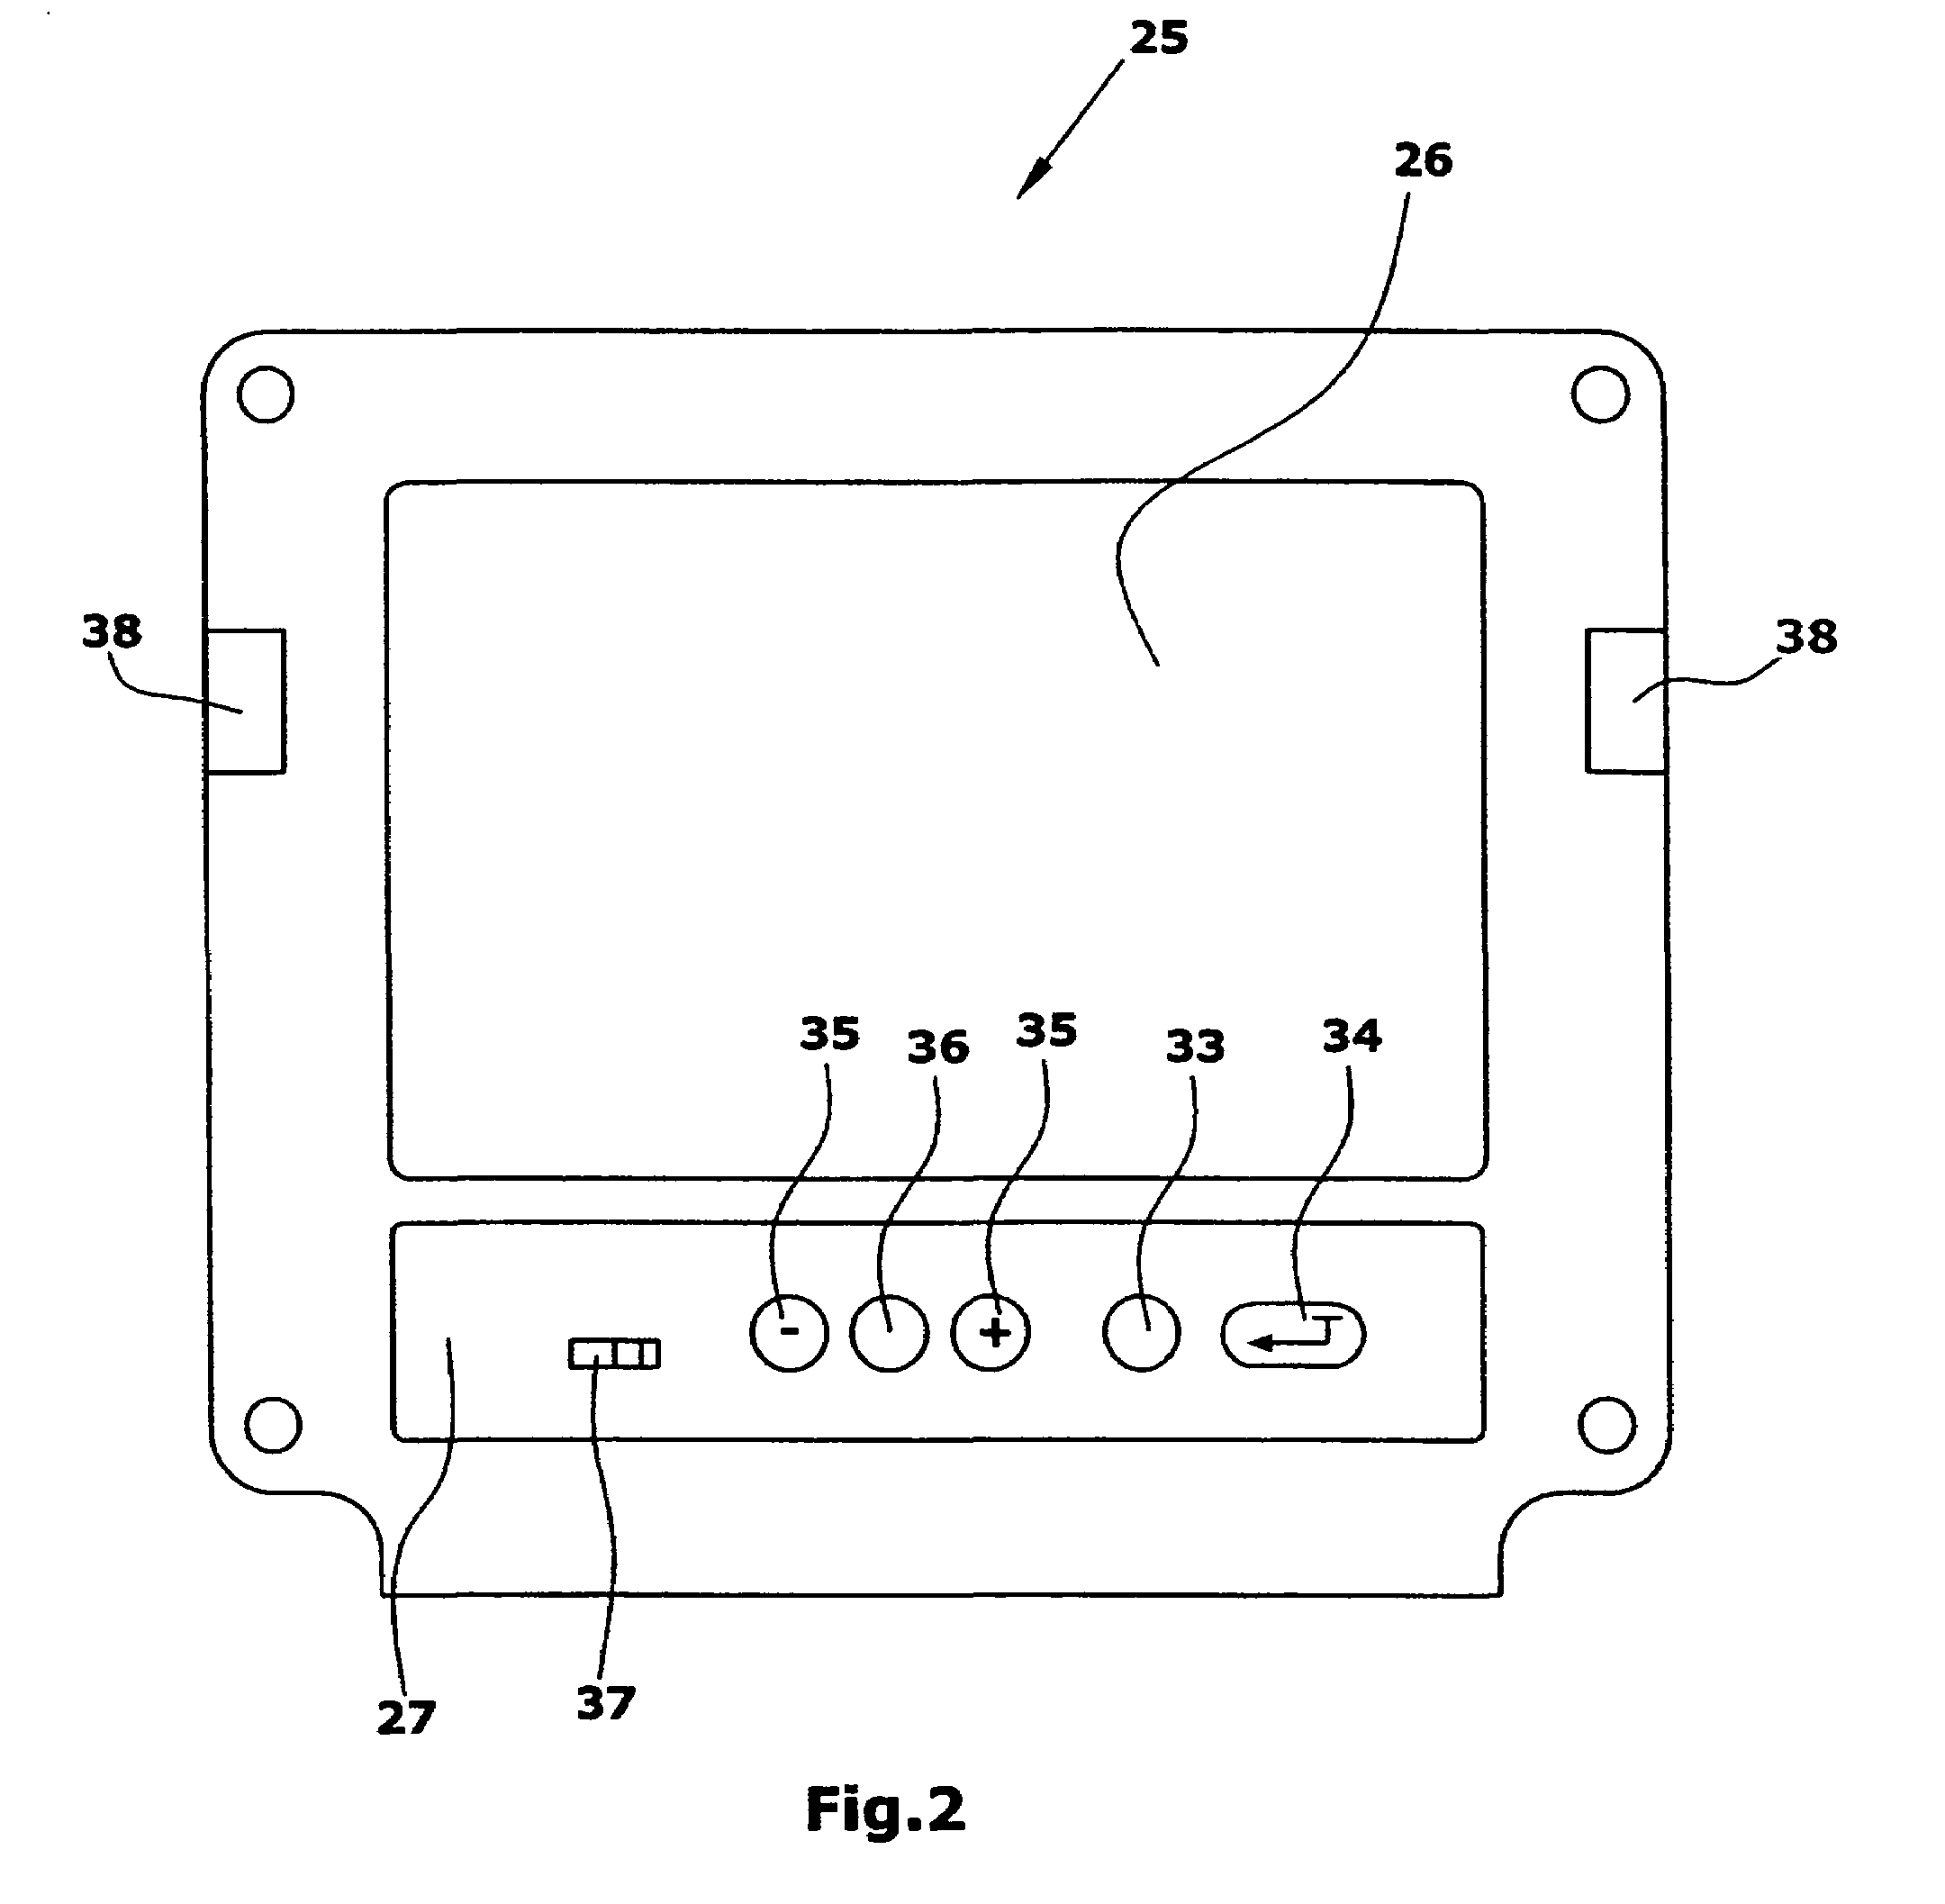 Blood treatment apparatus with alarm device